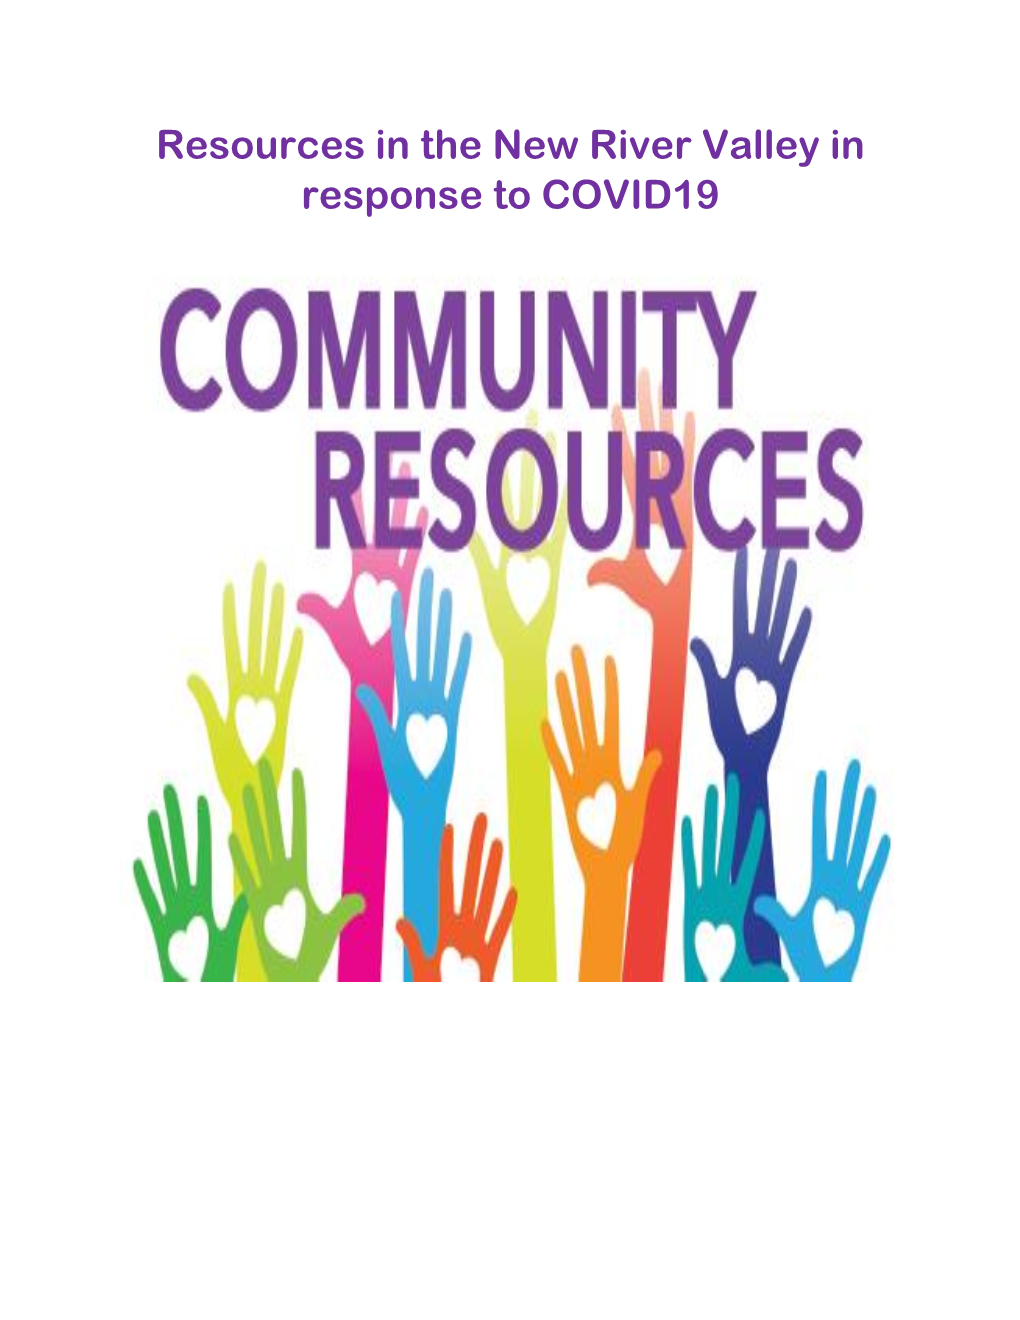 Resources in the New River Valley in Response to COVID19